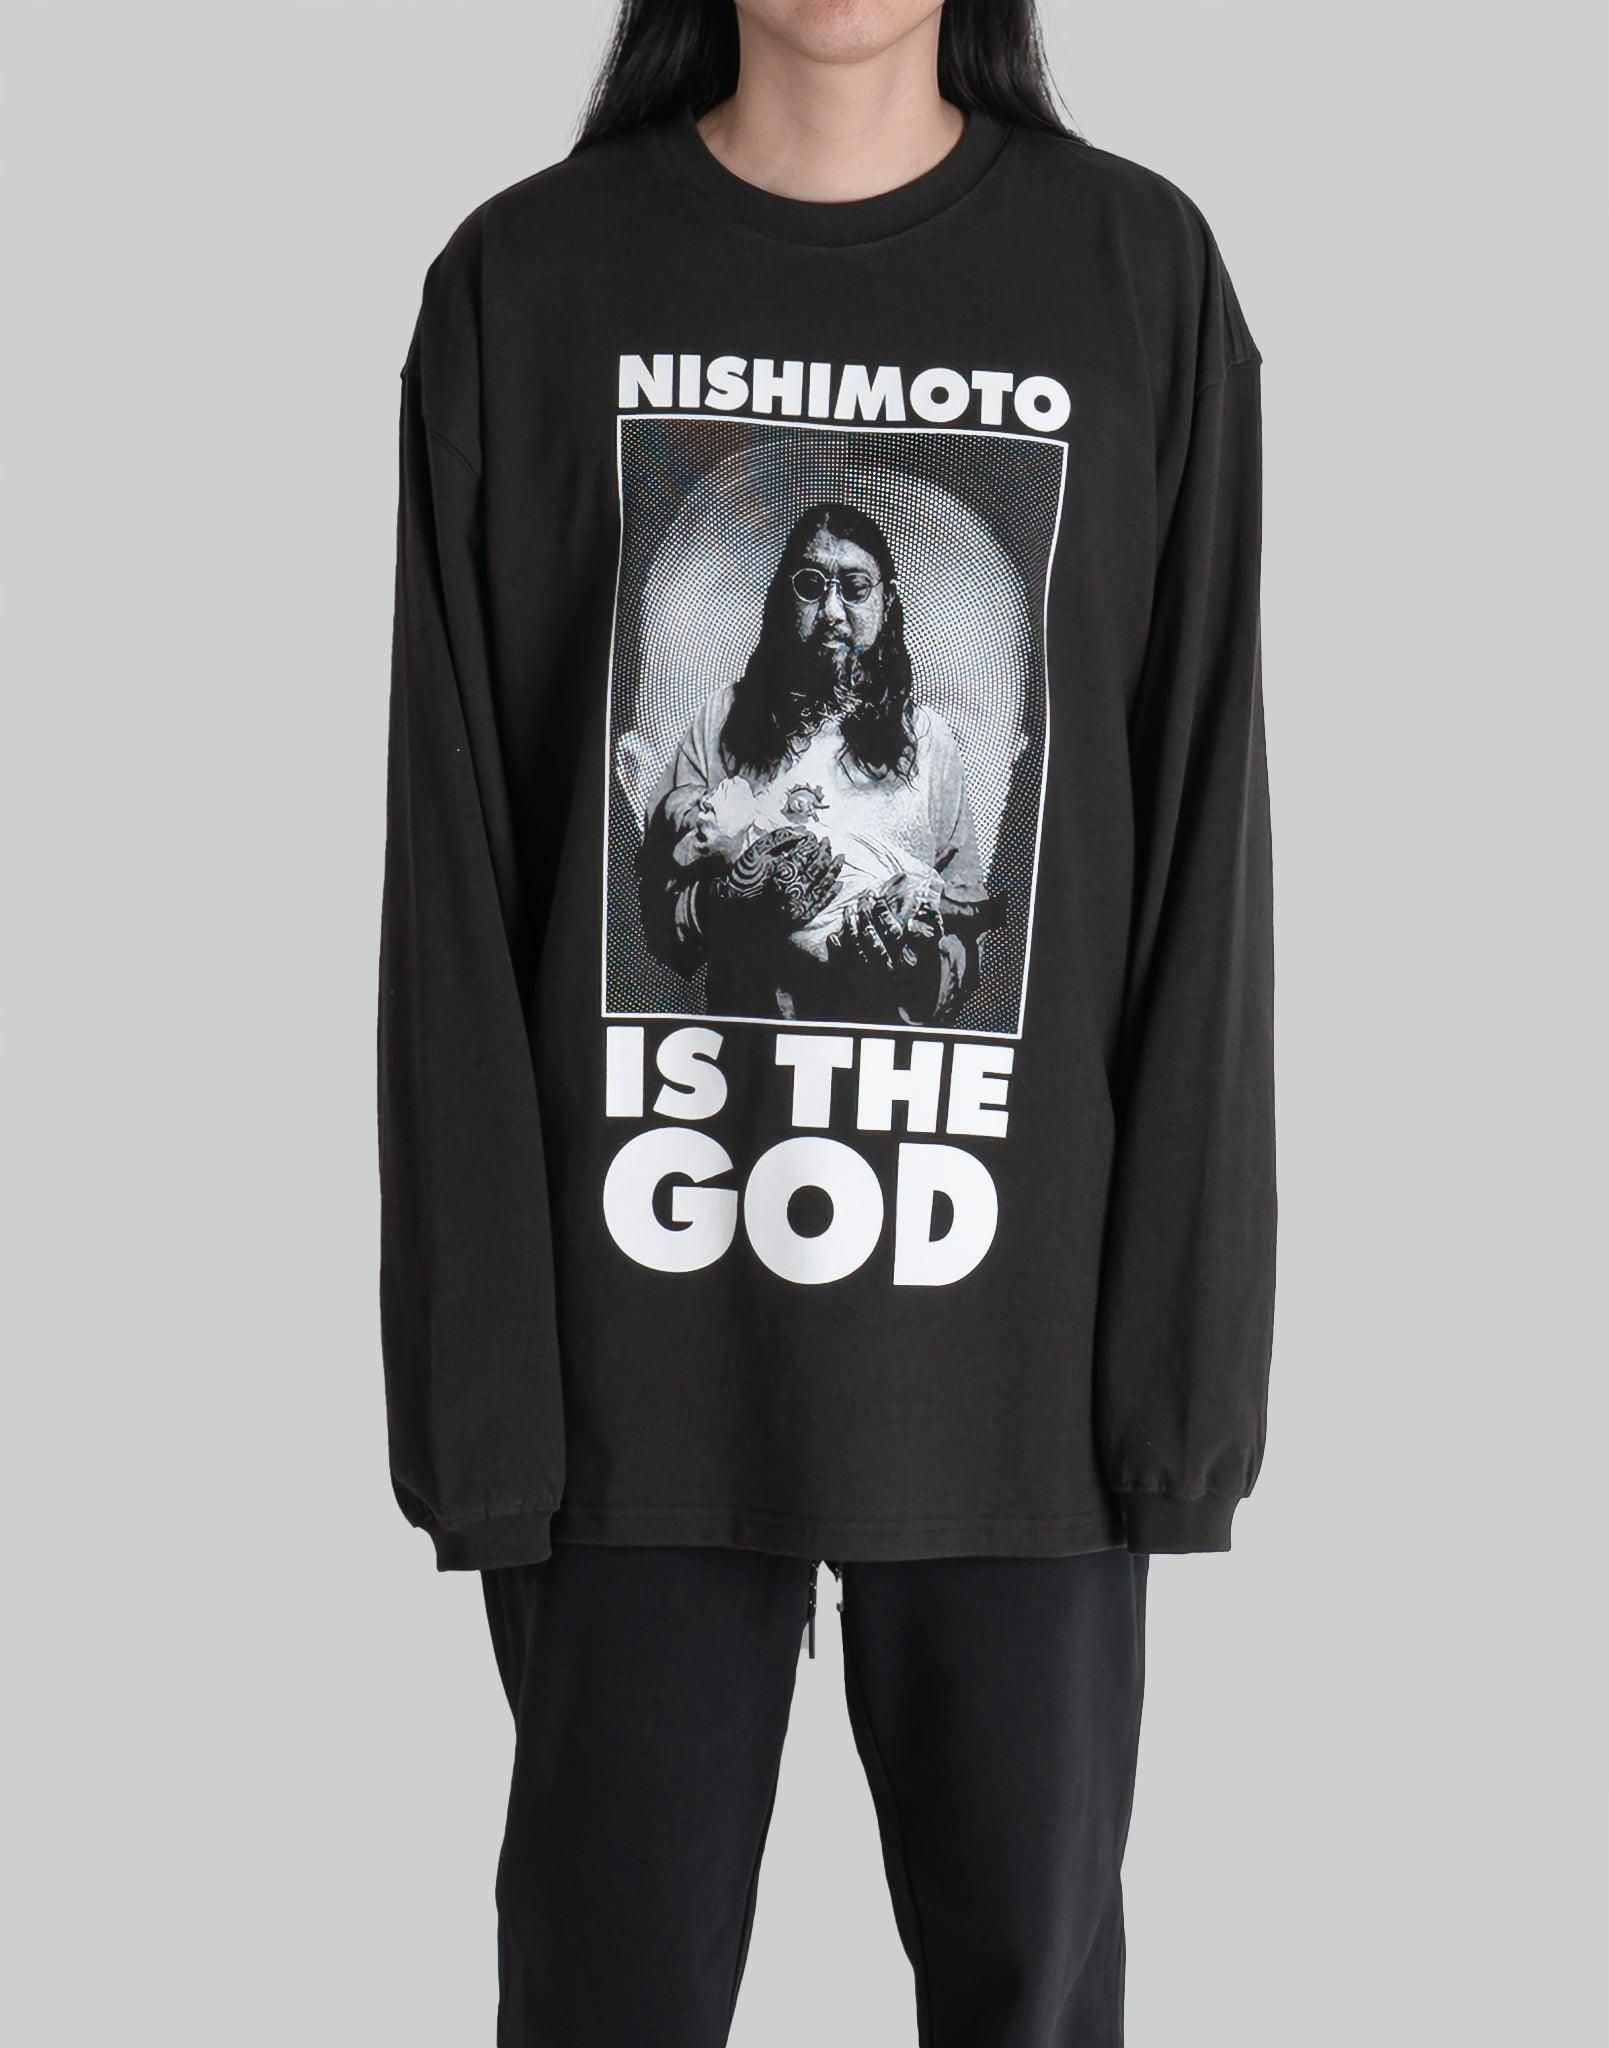 NISHIMOTO IS THE MOUTH GOD L/S TEE – 082plus